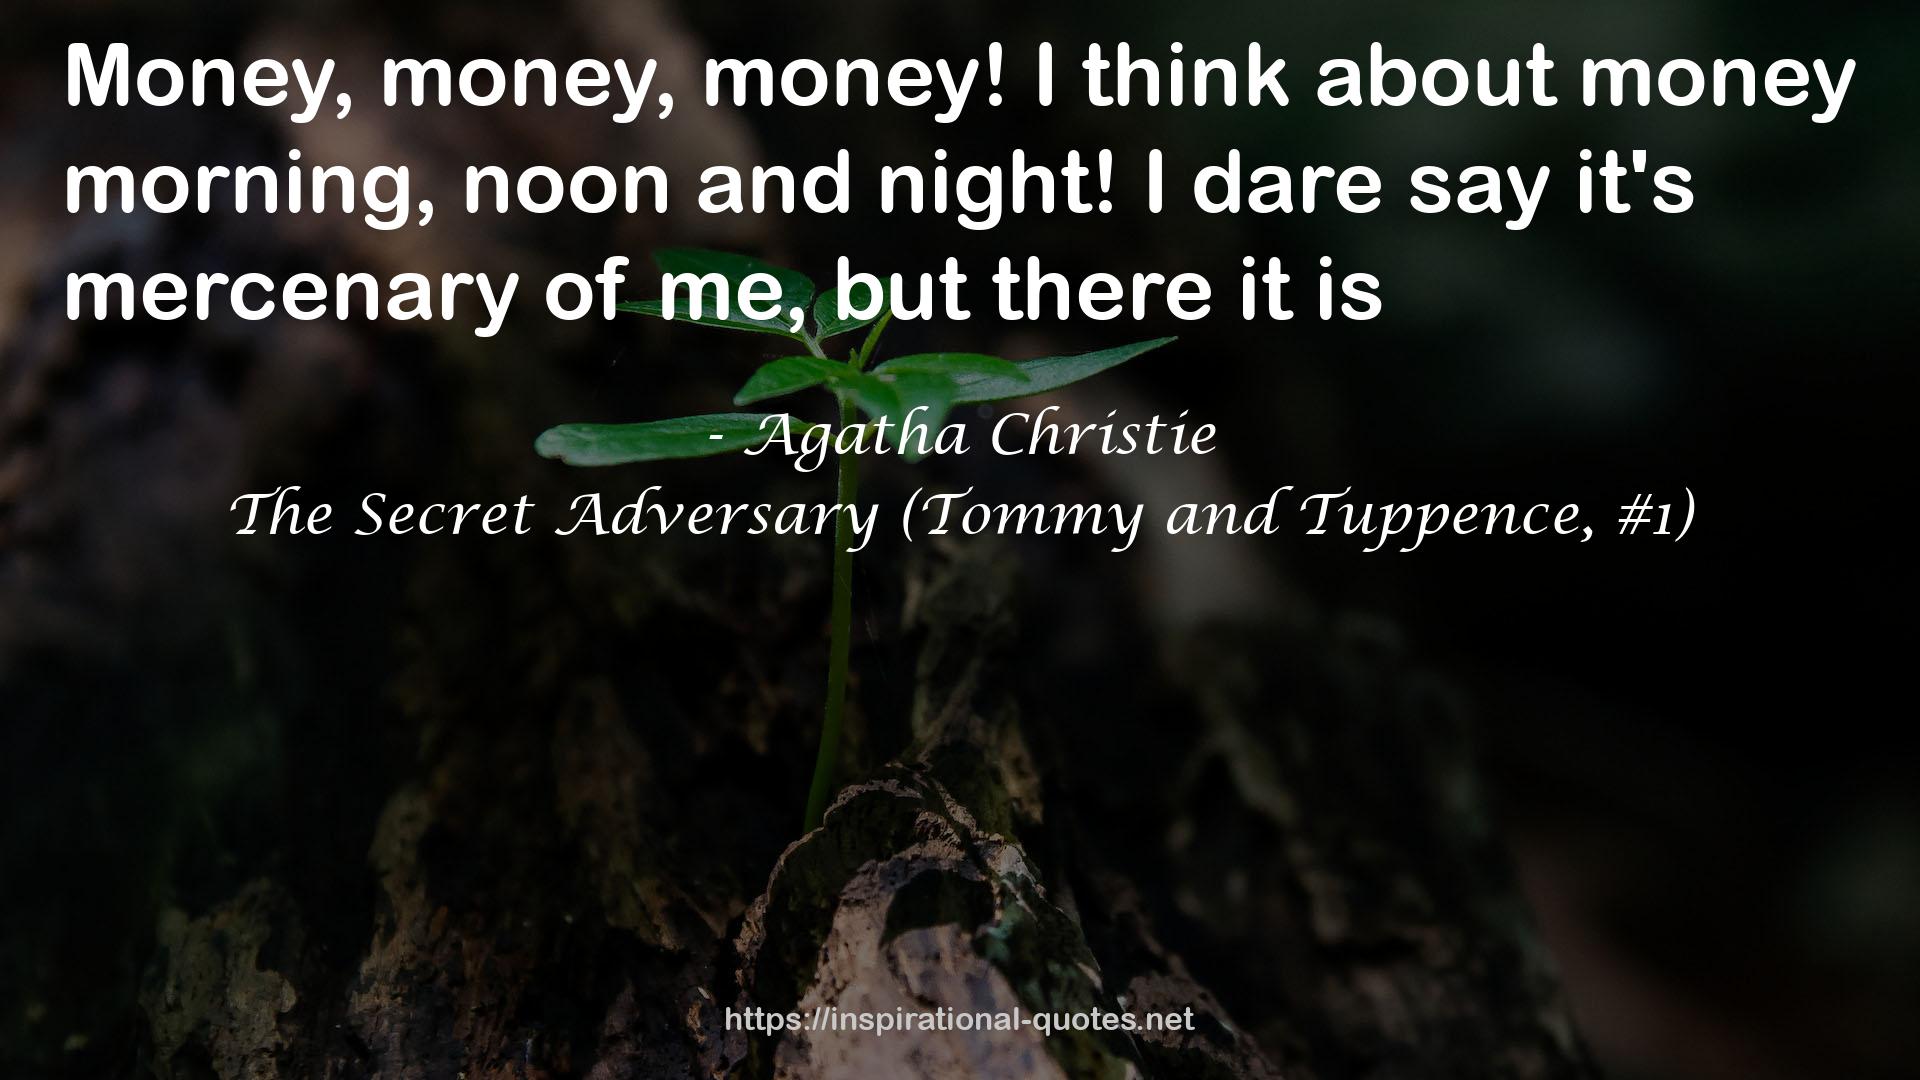 The Secret Adversary (Tommy and Tuppence, #1) QUOTES